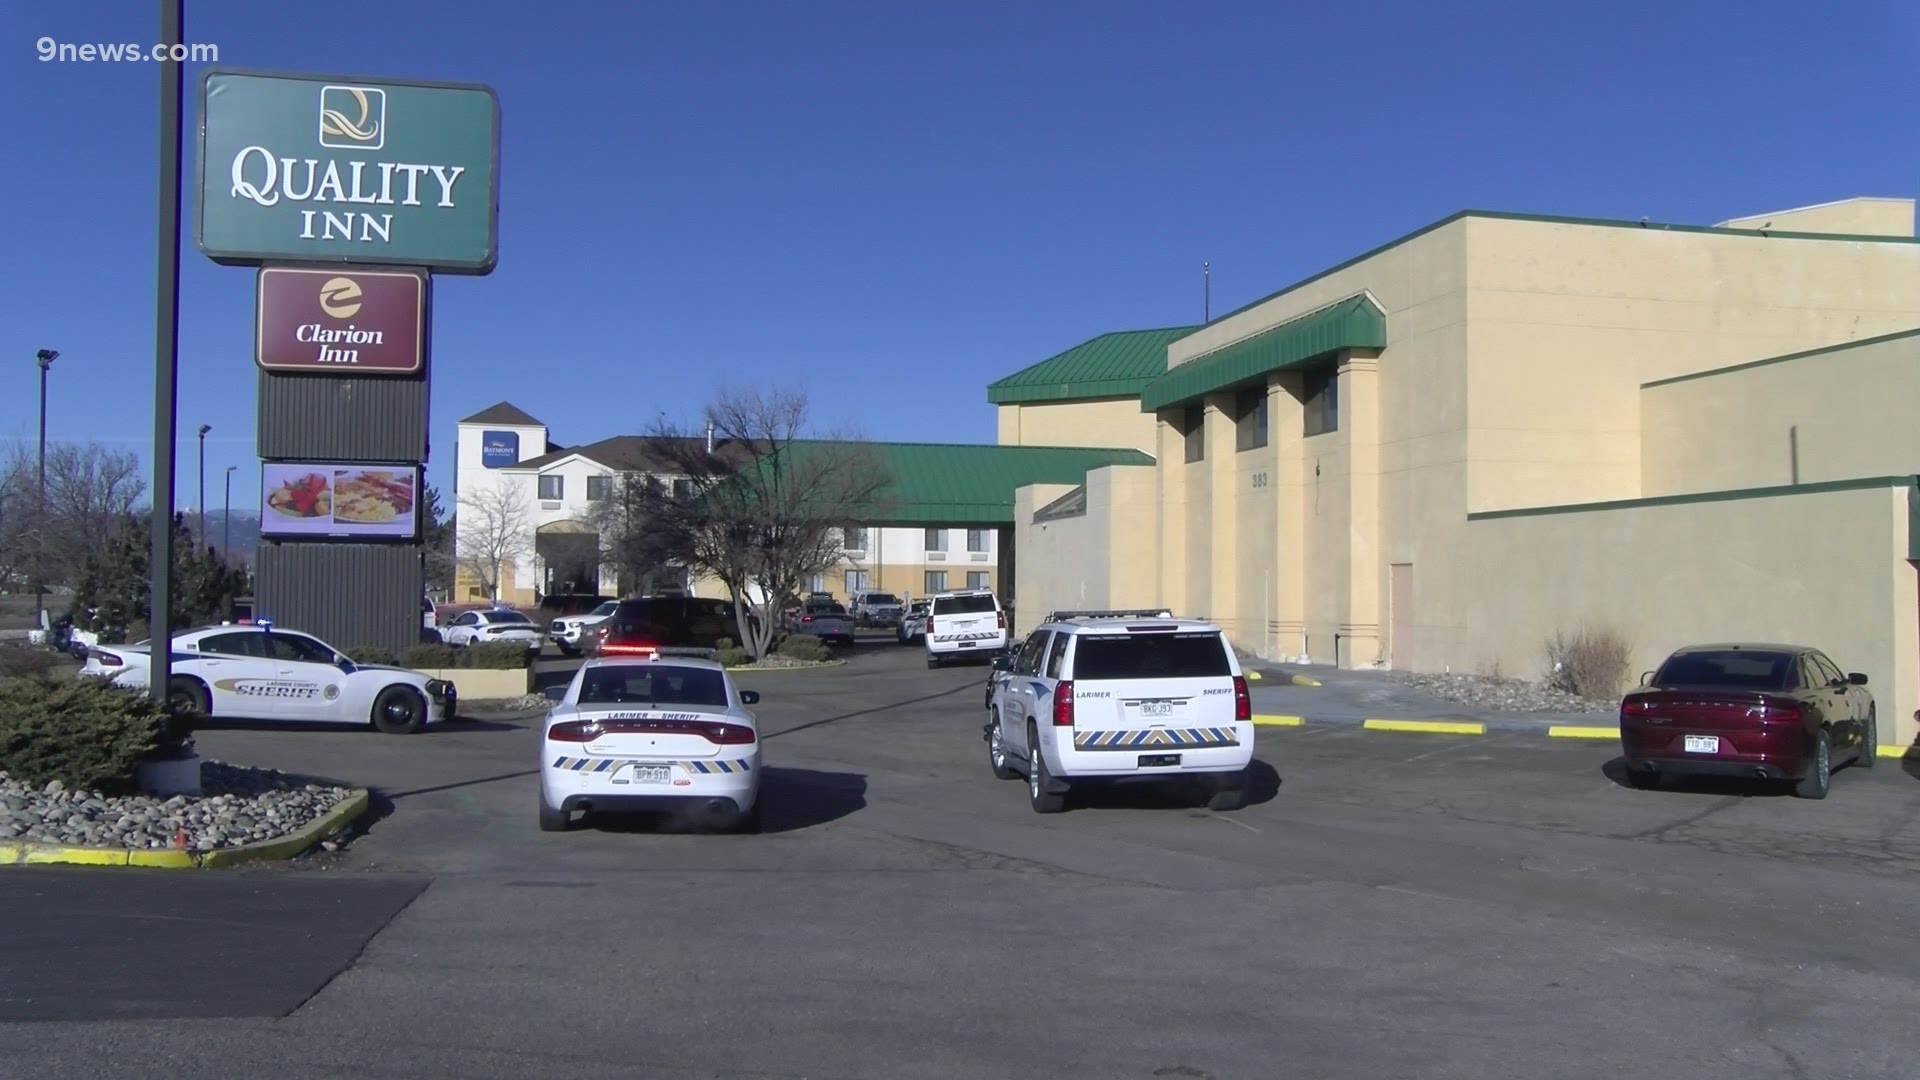 Deputies said they responded to a disturbance call at the Clarion Inn at I-25 and East Mulberry Street Wednesday morning.